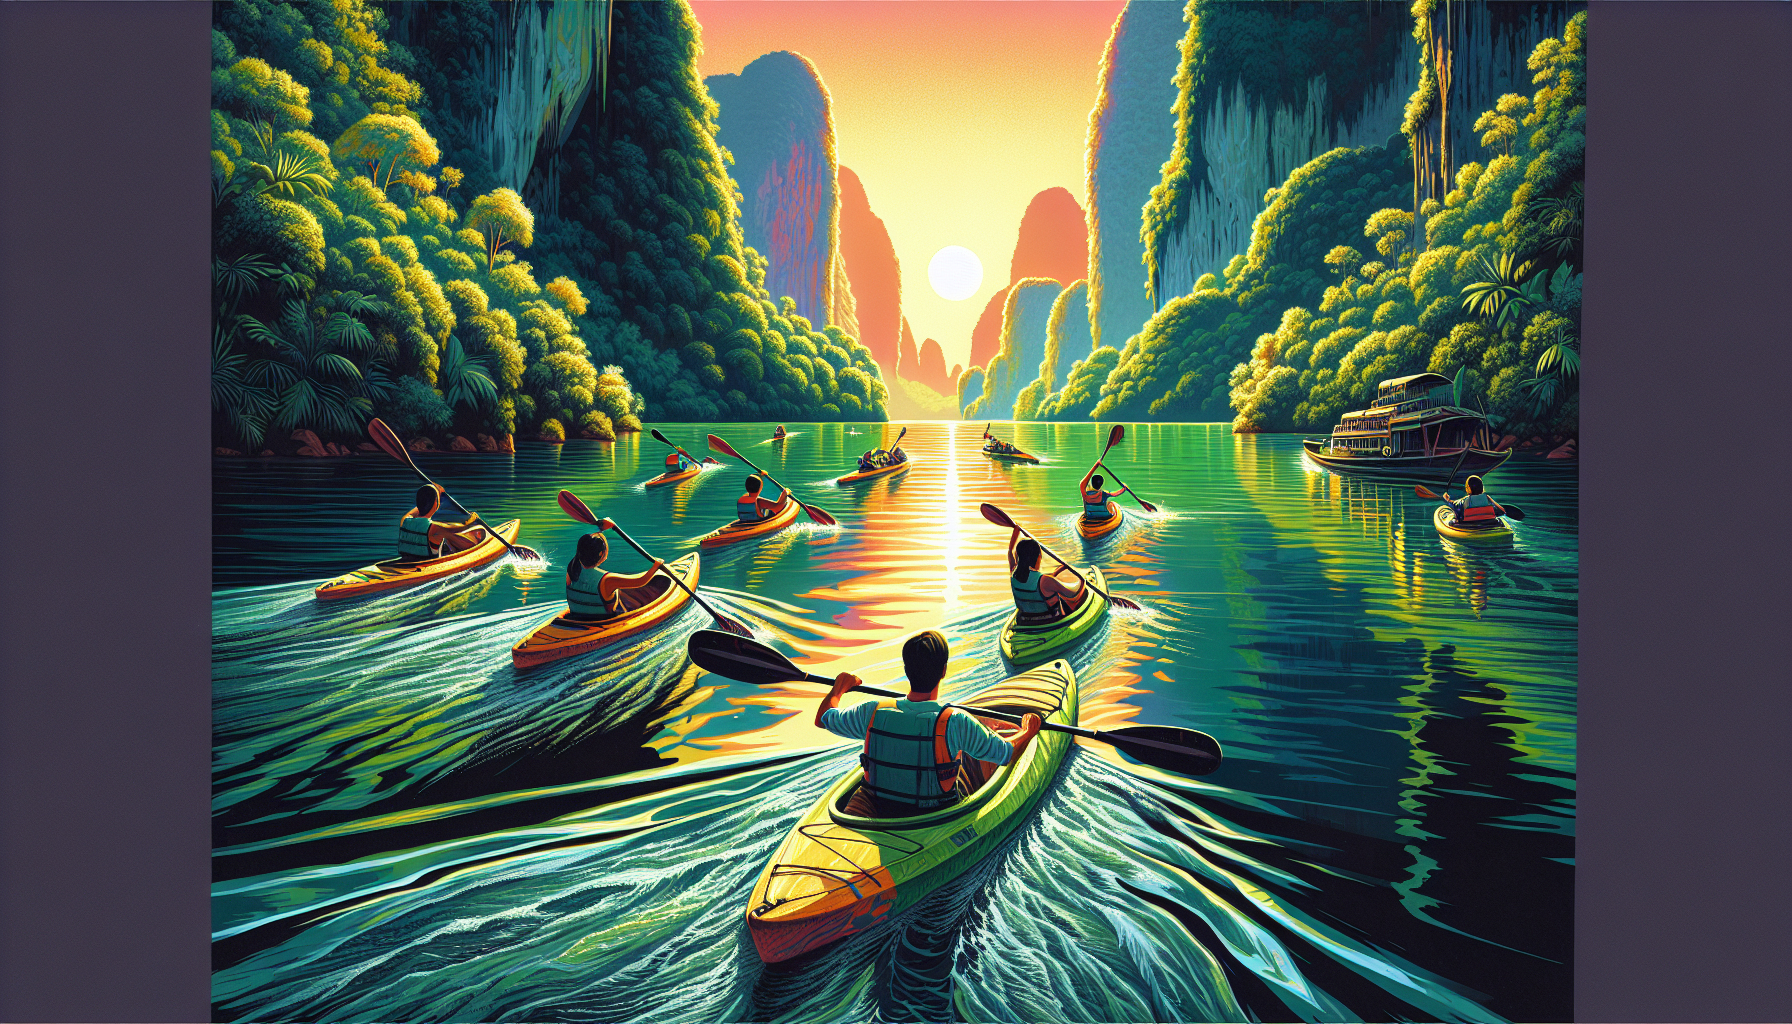 portrait of people kayaking on a river in Luang Praband Laos